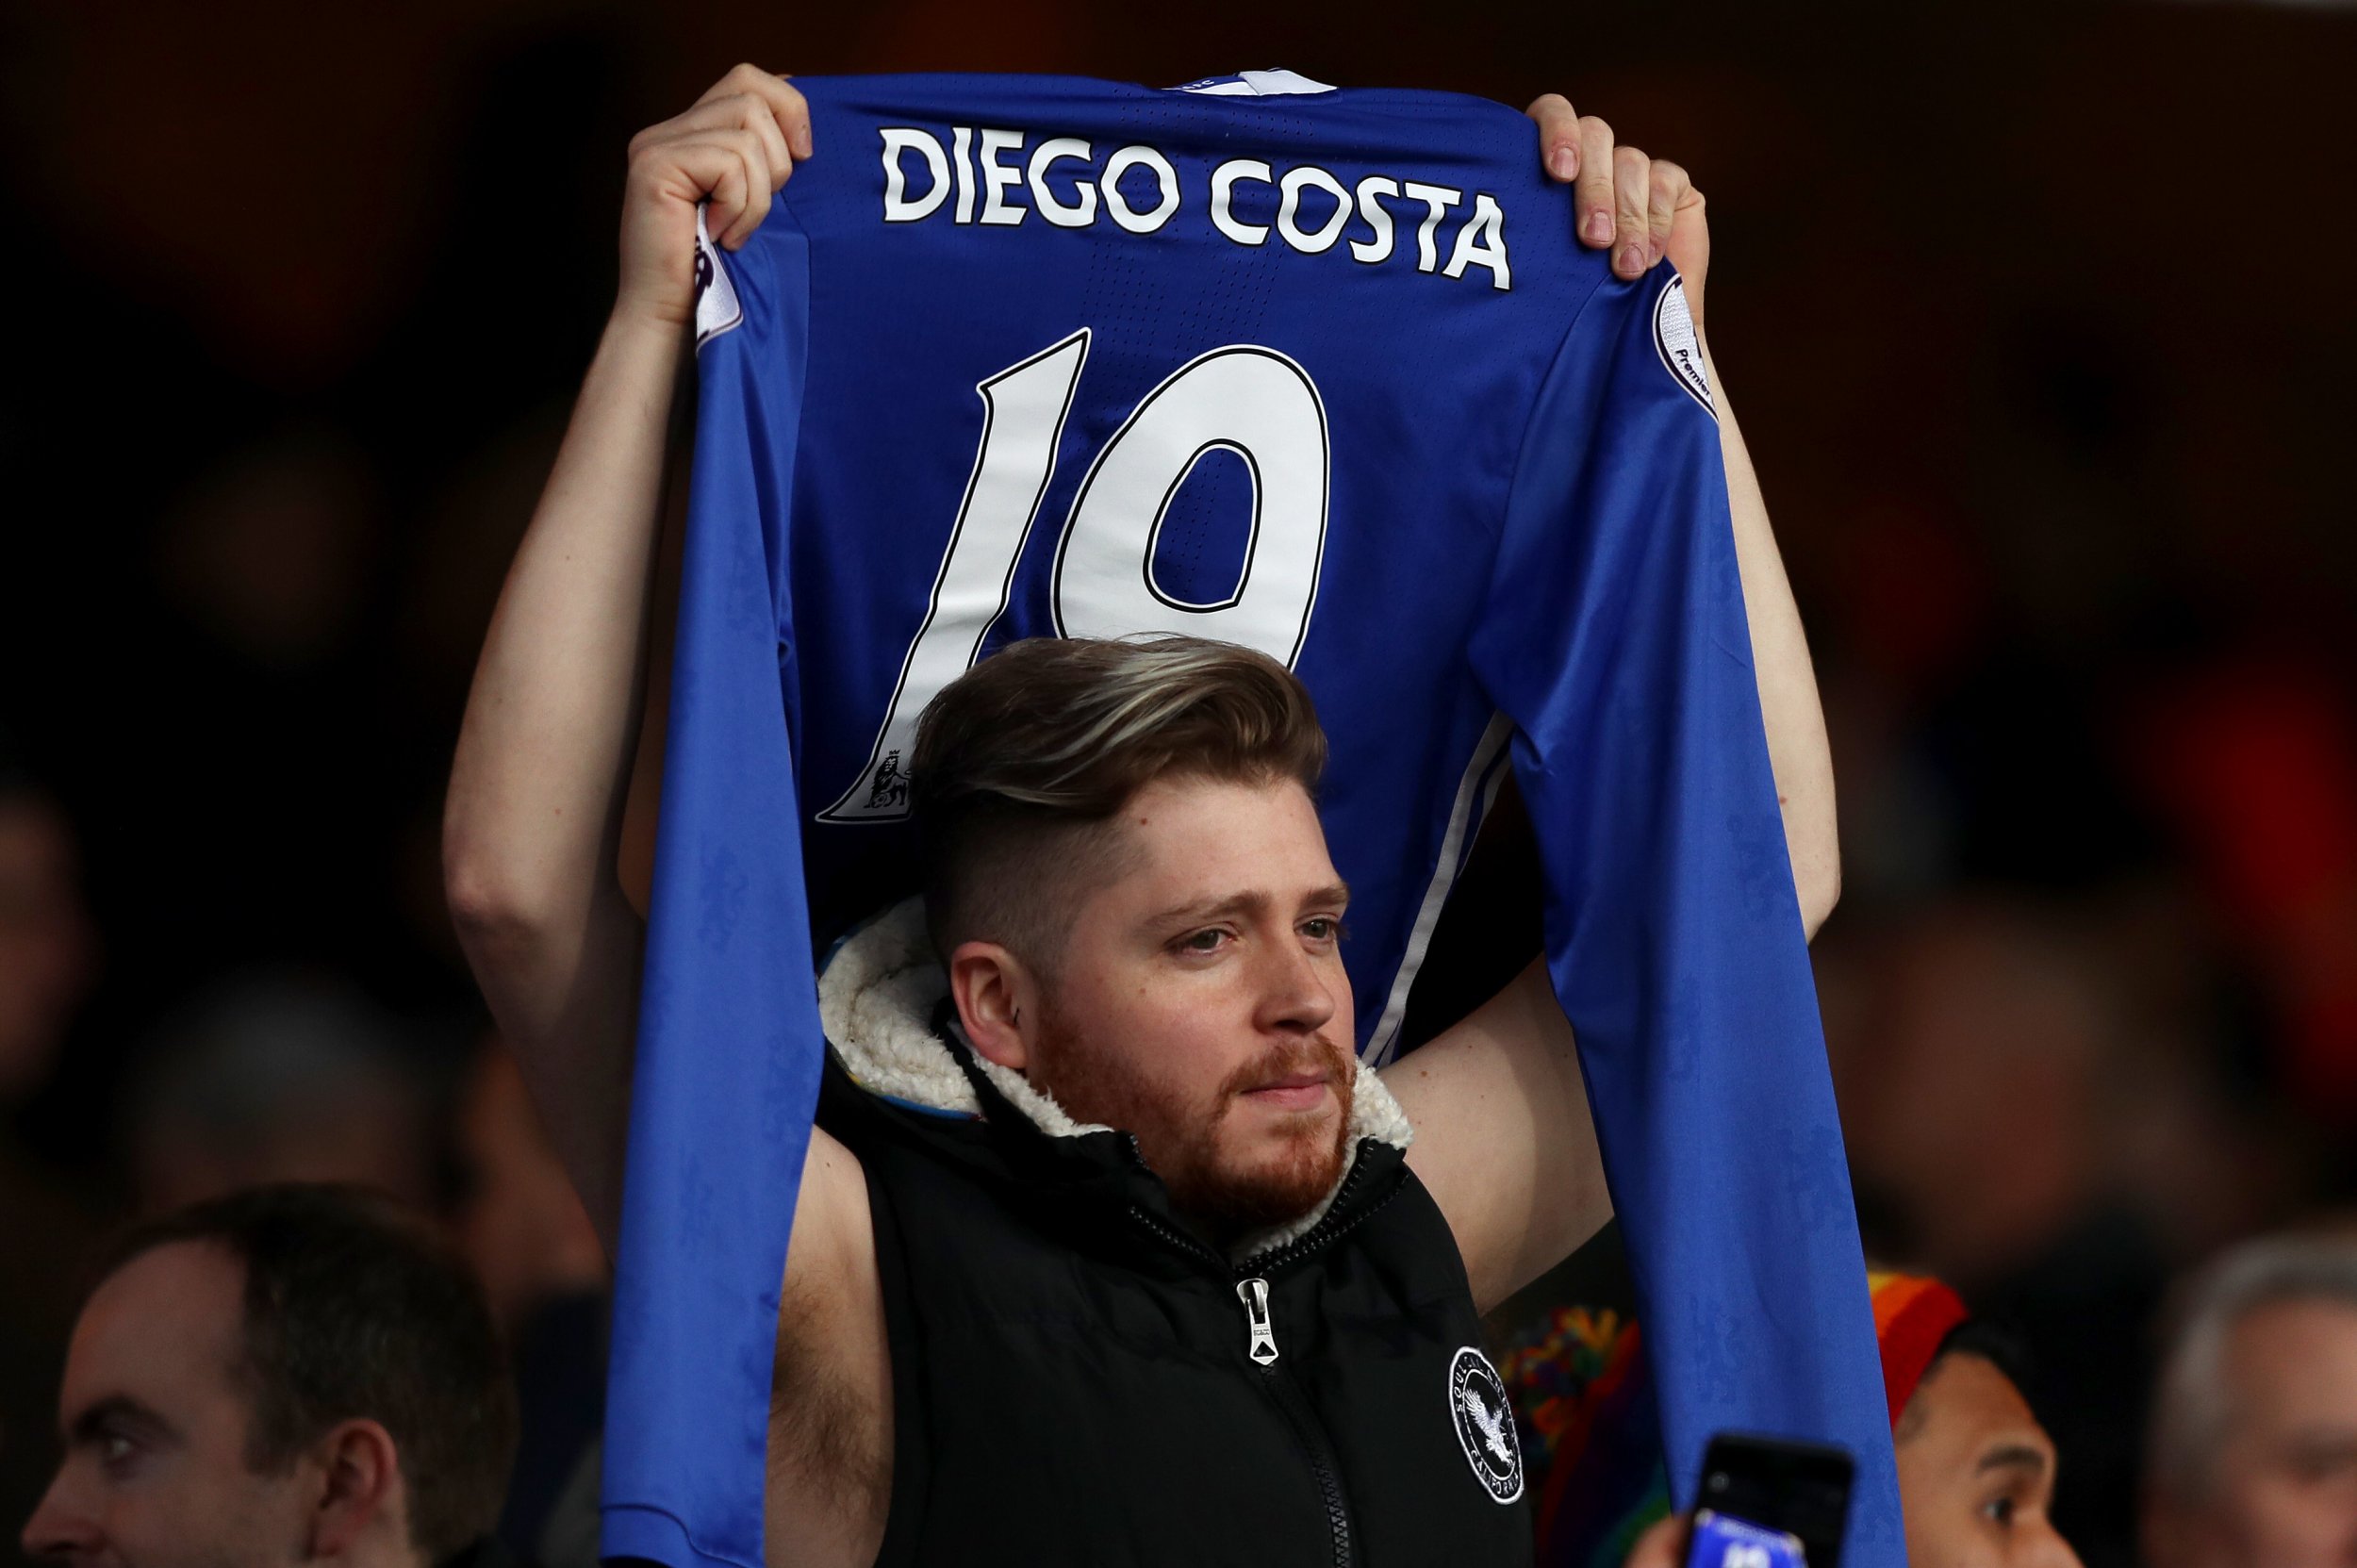 A Chelsea fan holds up a Diego Costa shirt